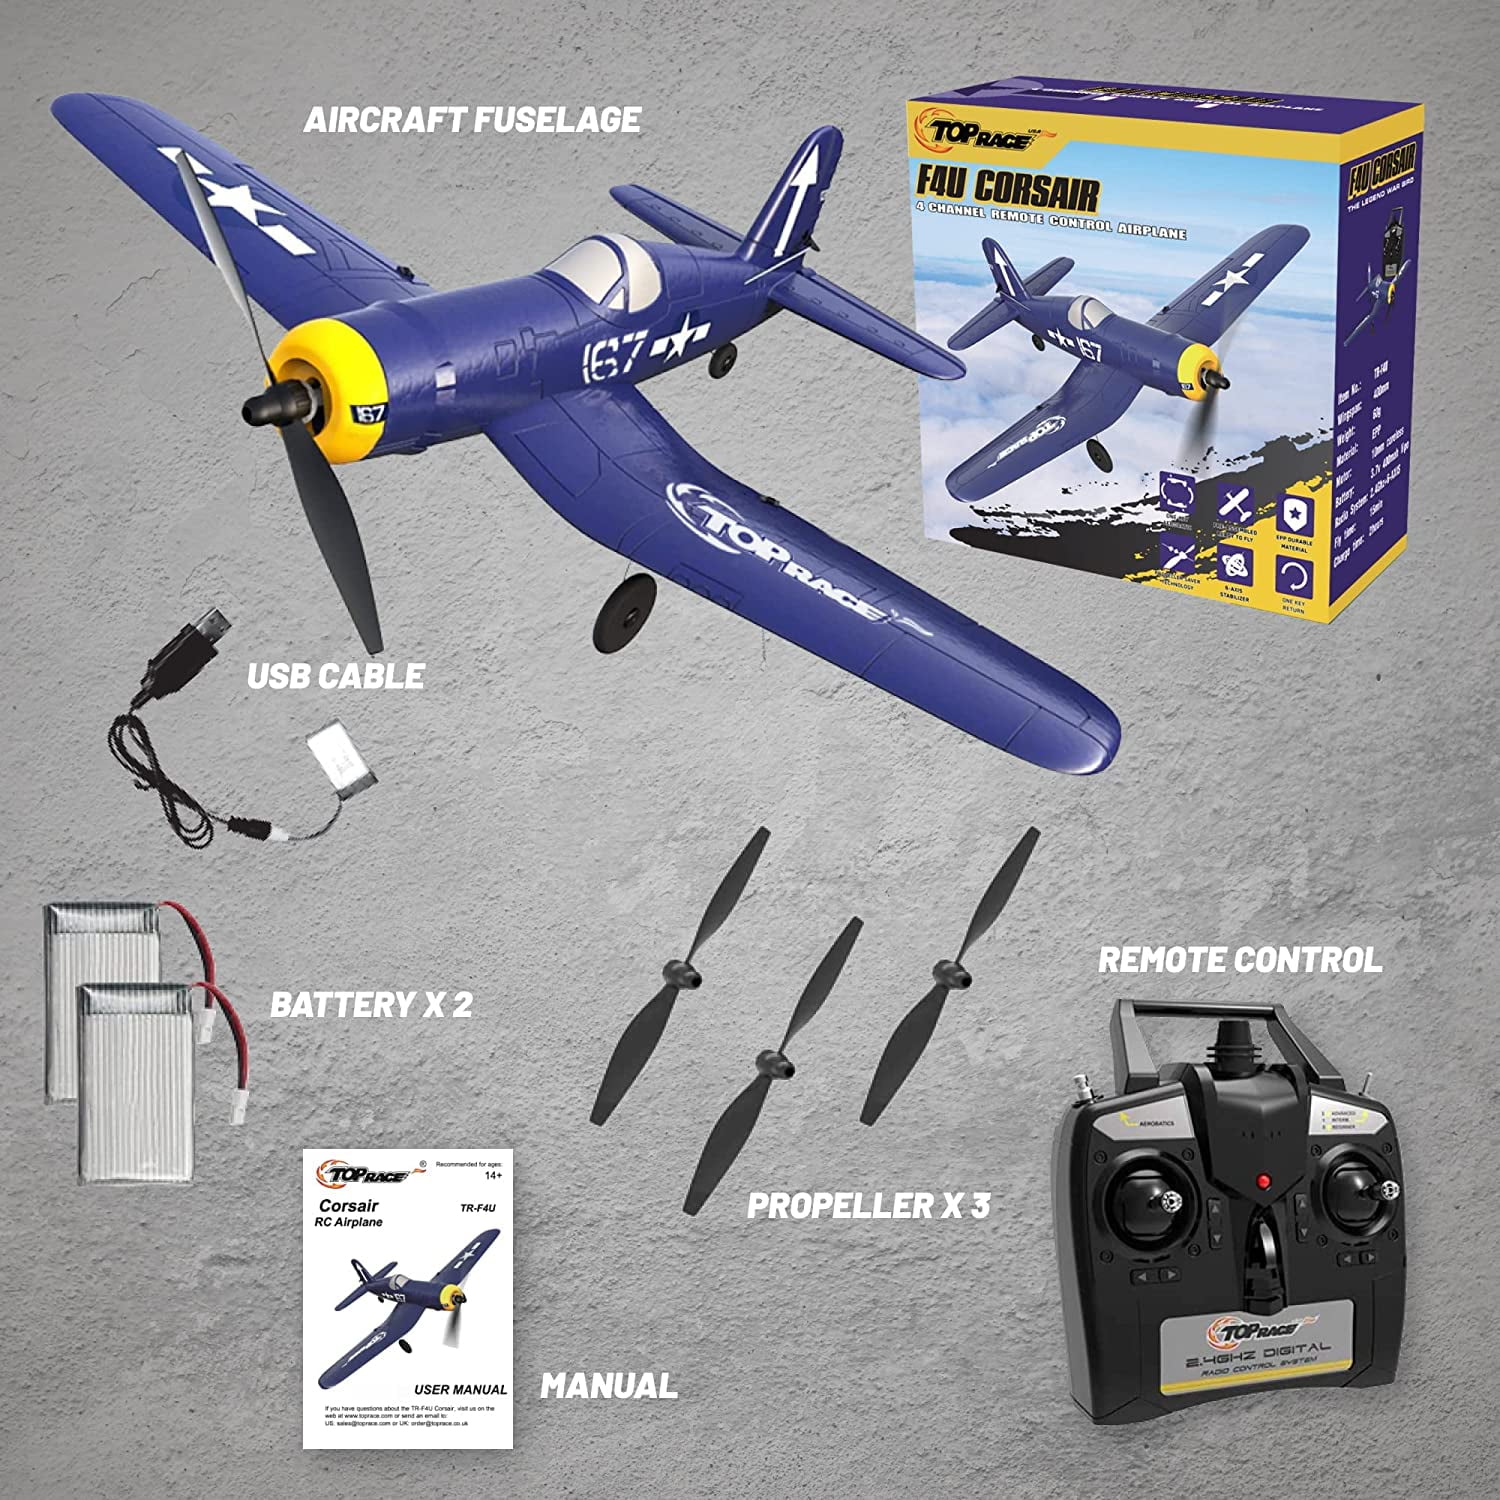 Top Race F4U Corsair Fighter RC Plane - Battery Powered 4 Remote Control Airplane with 300 Range and Capabilities - Includes RC Plane Propeller - Walmart.com